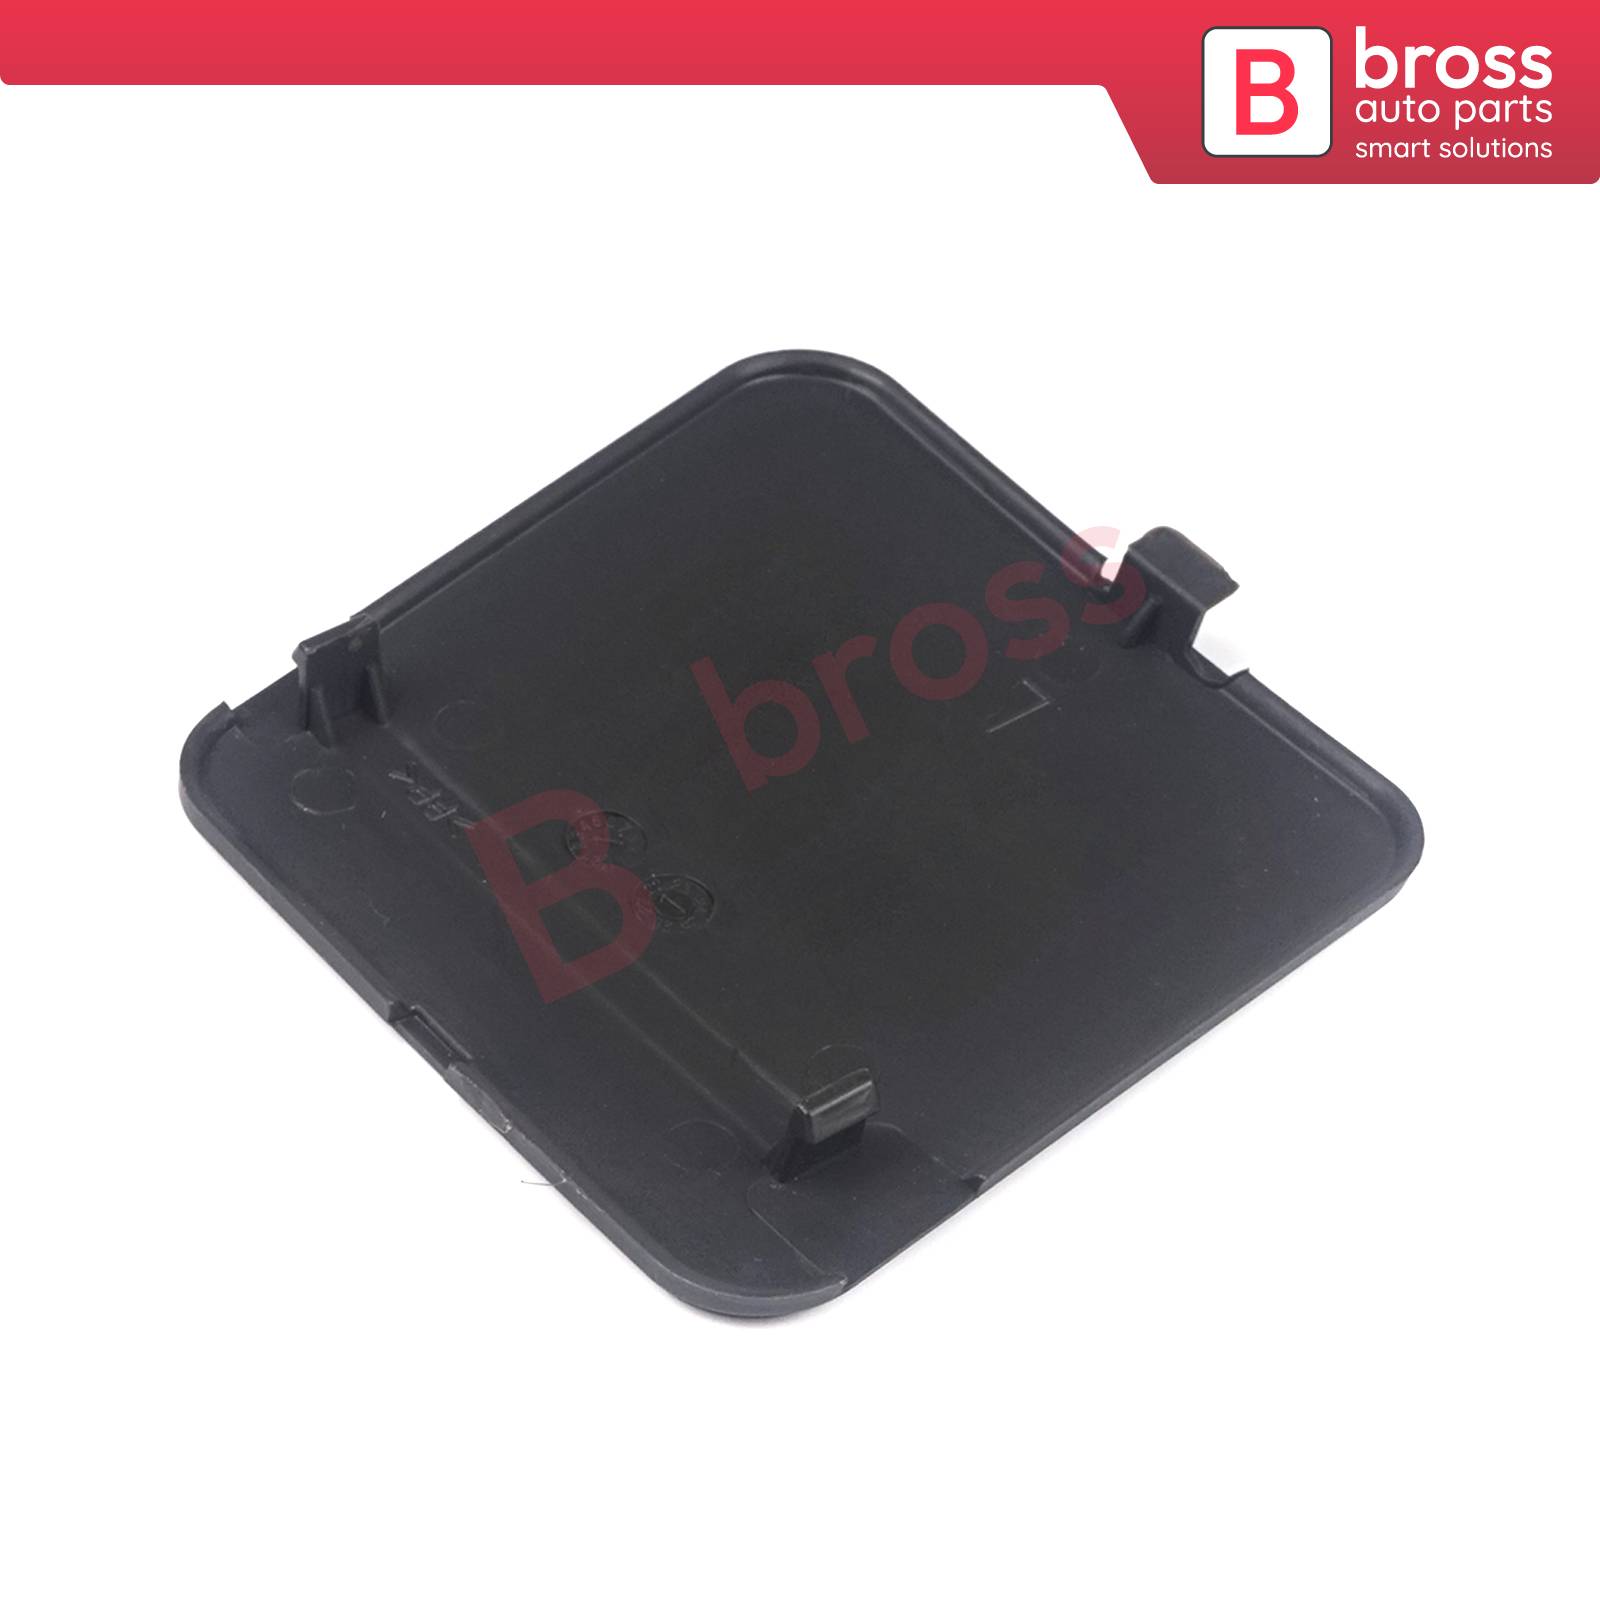 Bross Auto Parts LLC - BSP1082 Front Bumper Tow Hook Eye Cover Cap Left  4447727 for Ford Transit Tourneo Connect 2002-2006